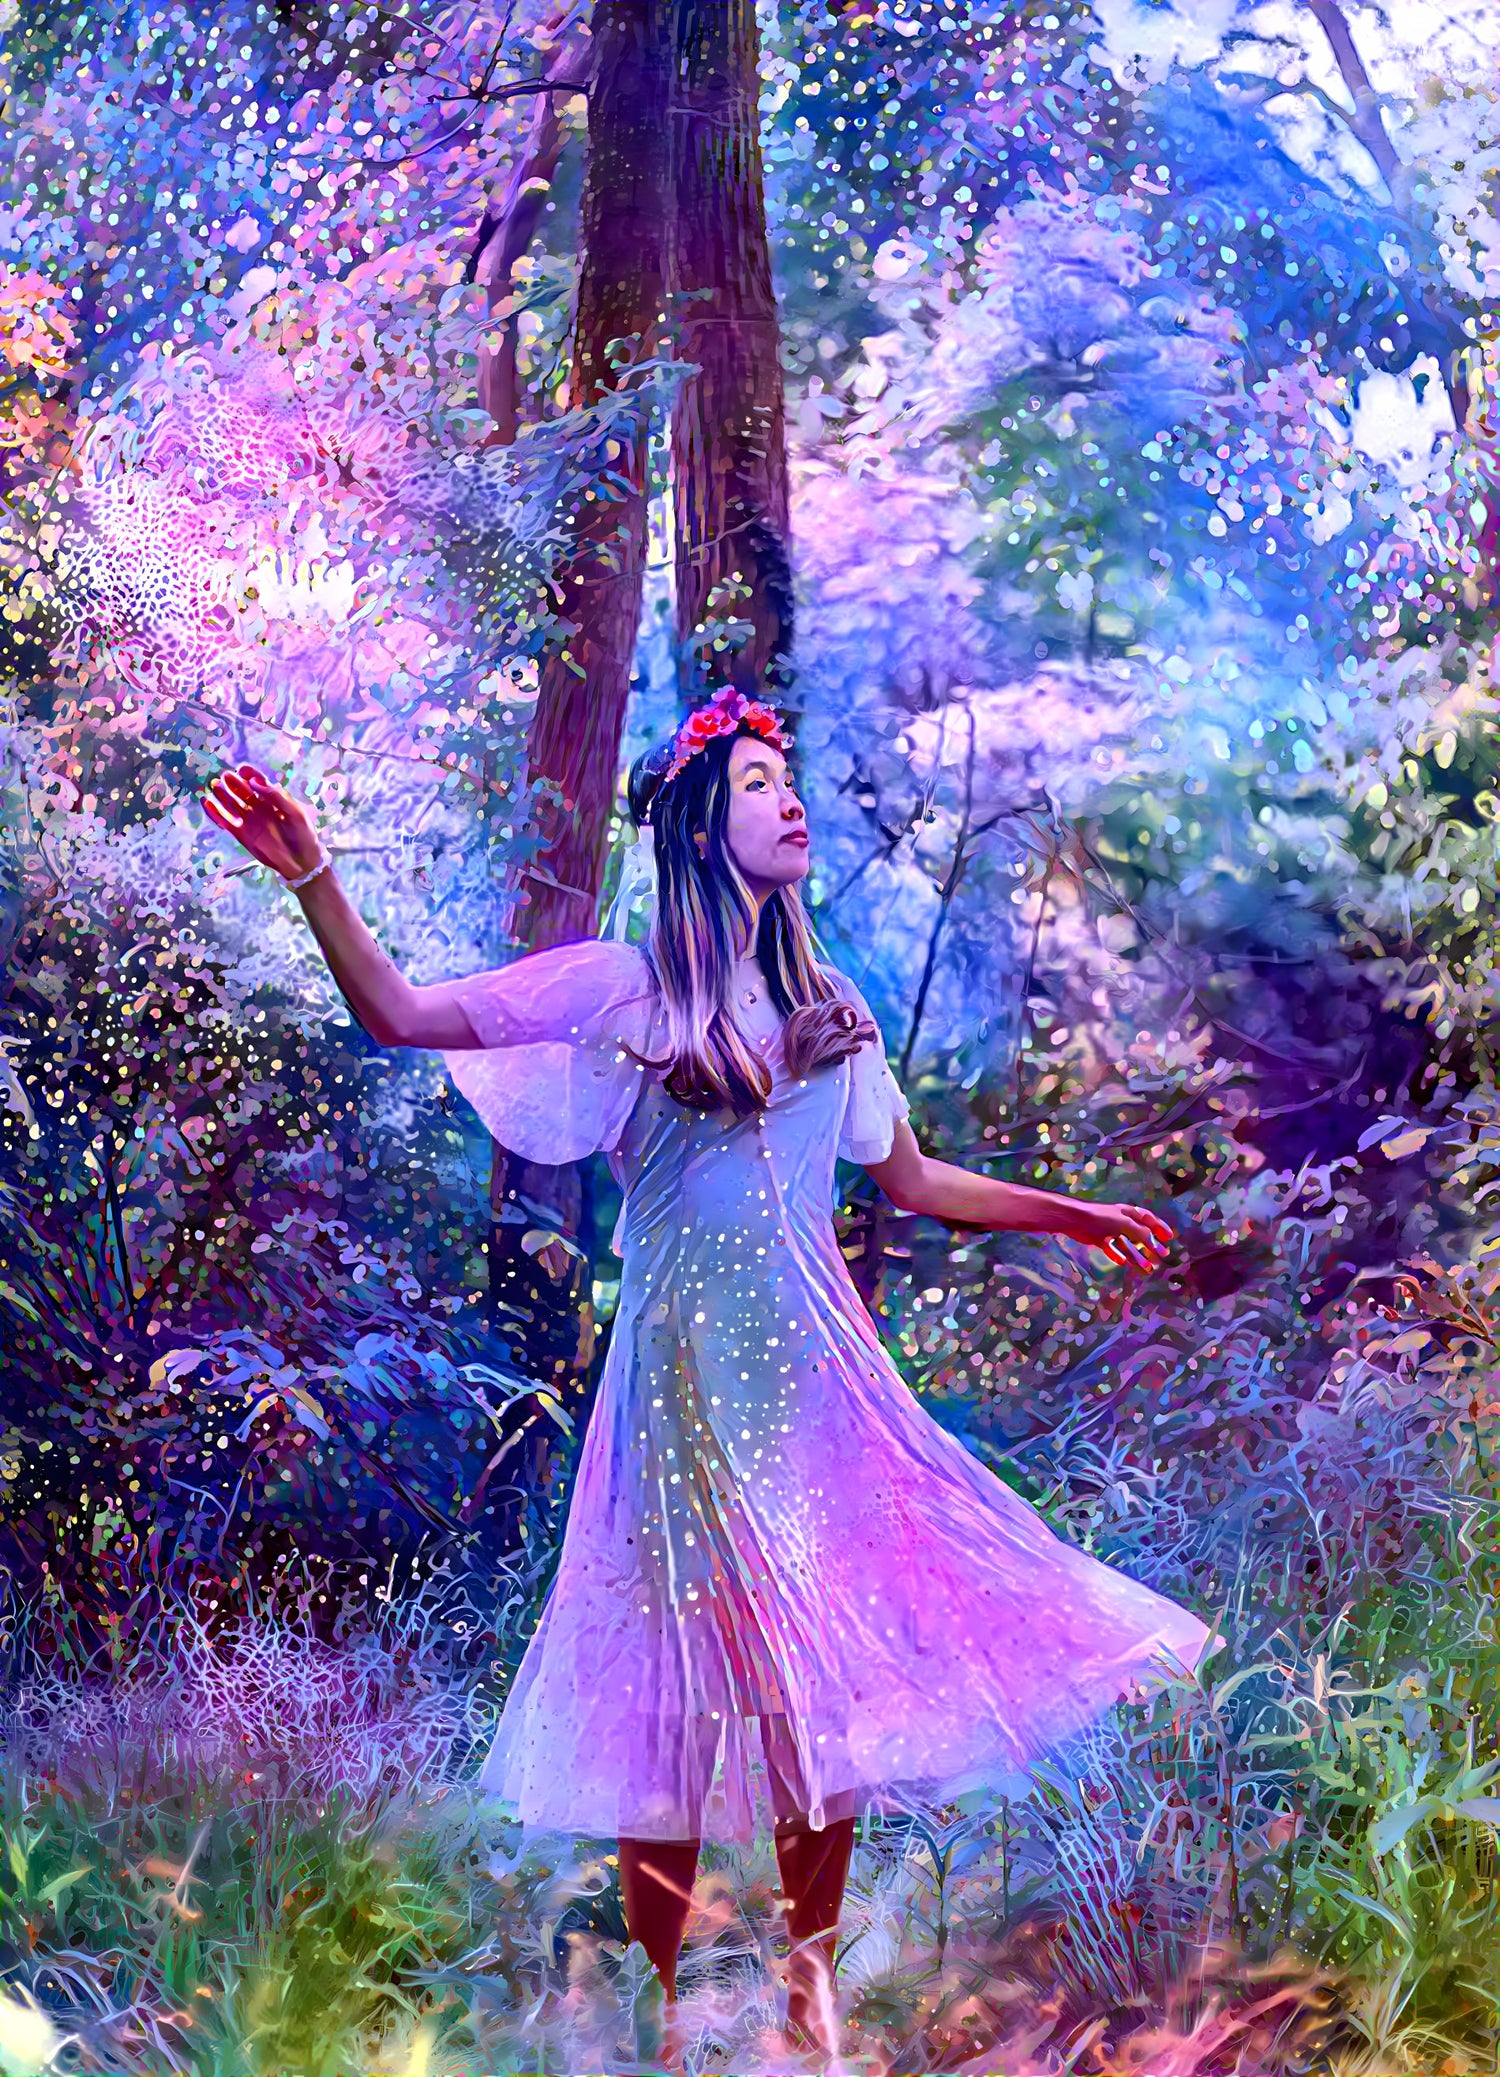 Maiden in a Magical Forest Artwork